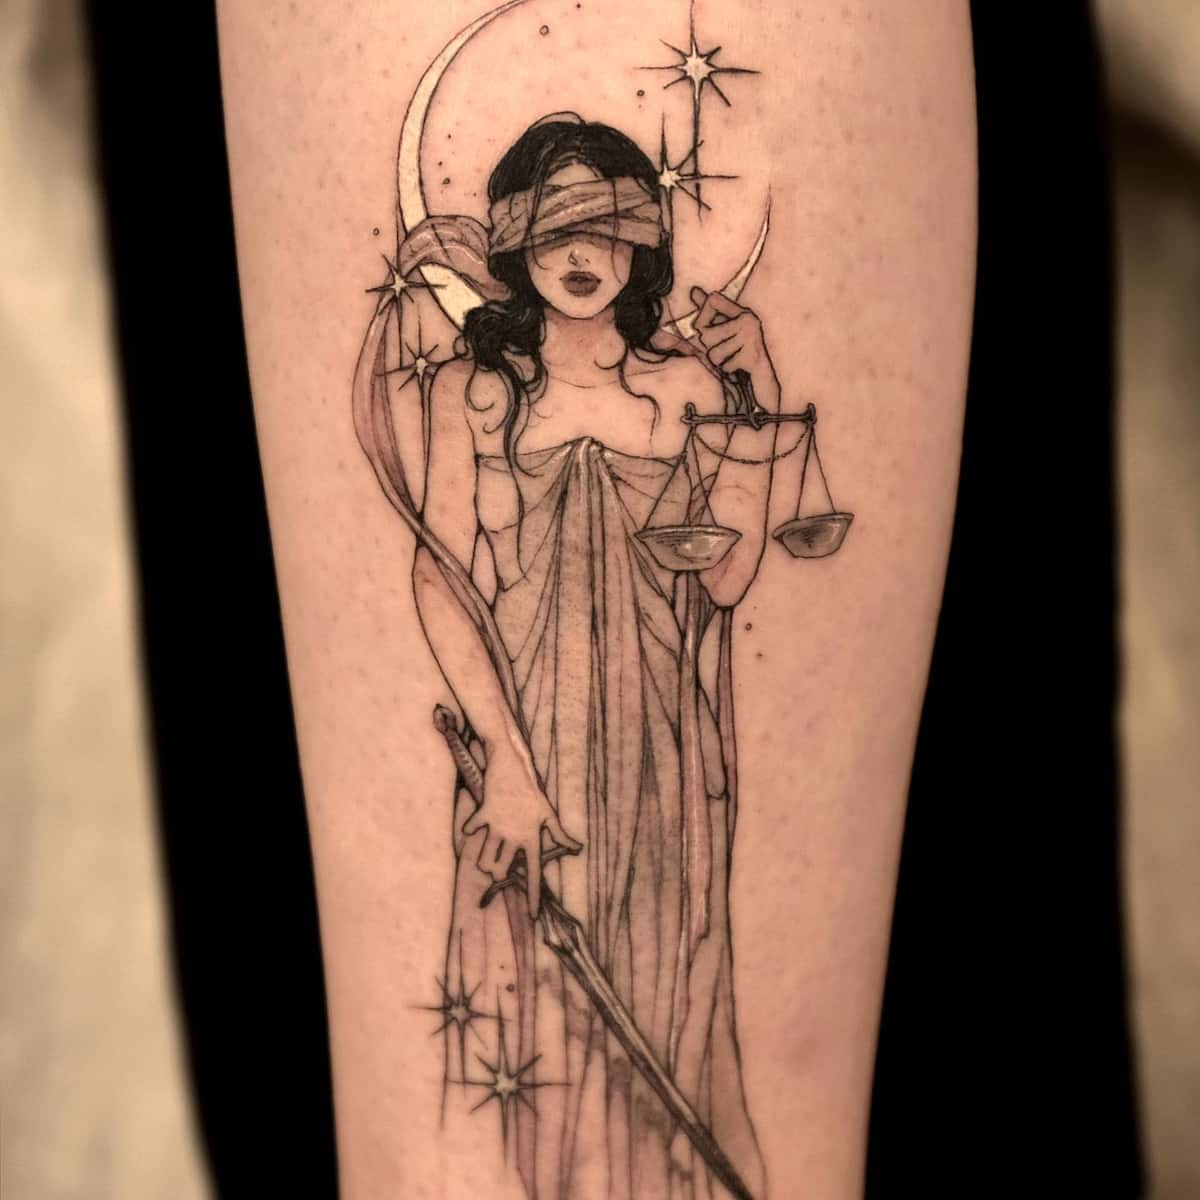 Nyx Goddess of the Night done by Nina at First Class Tattoos in NYC  r tattoos